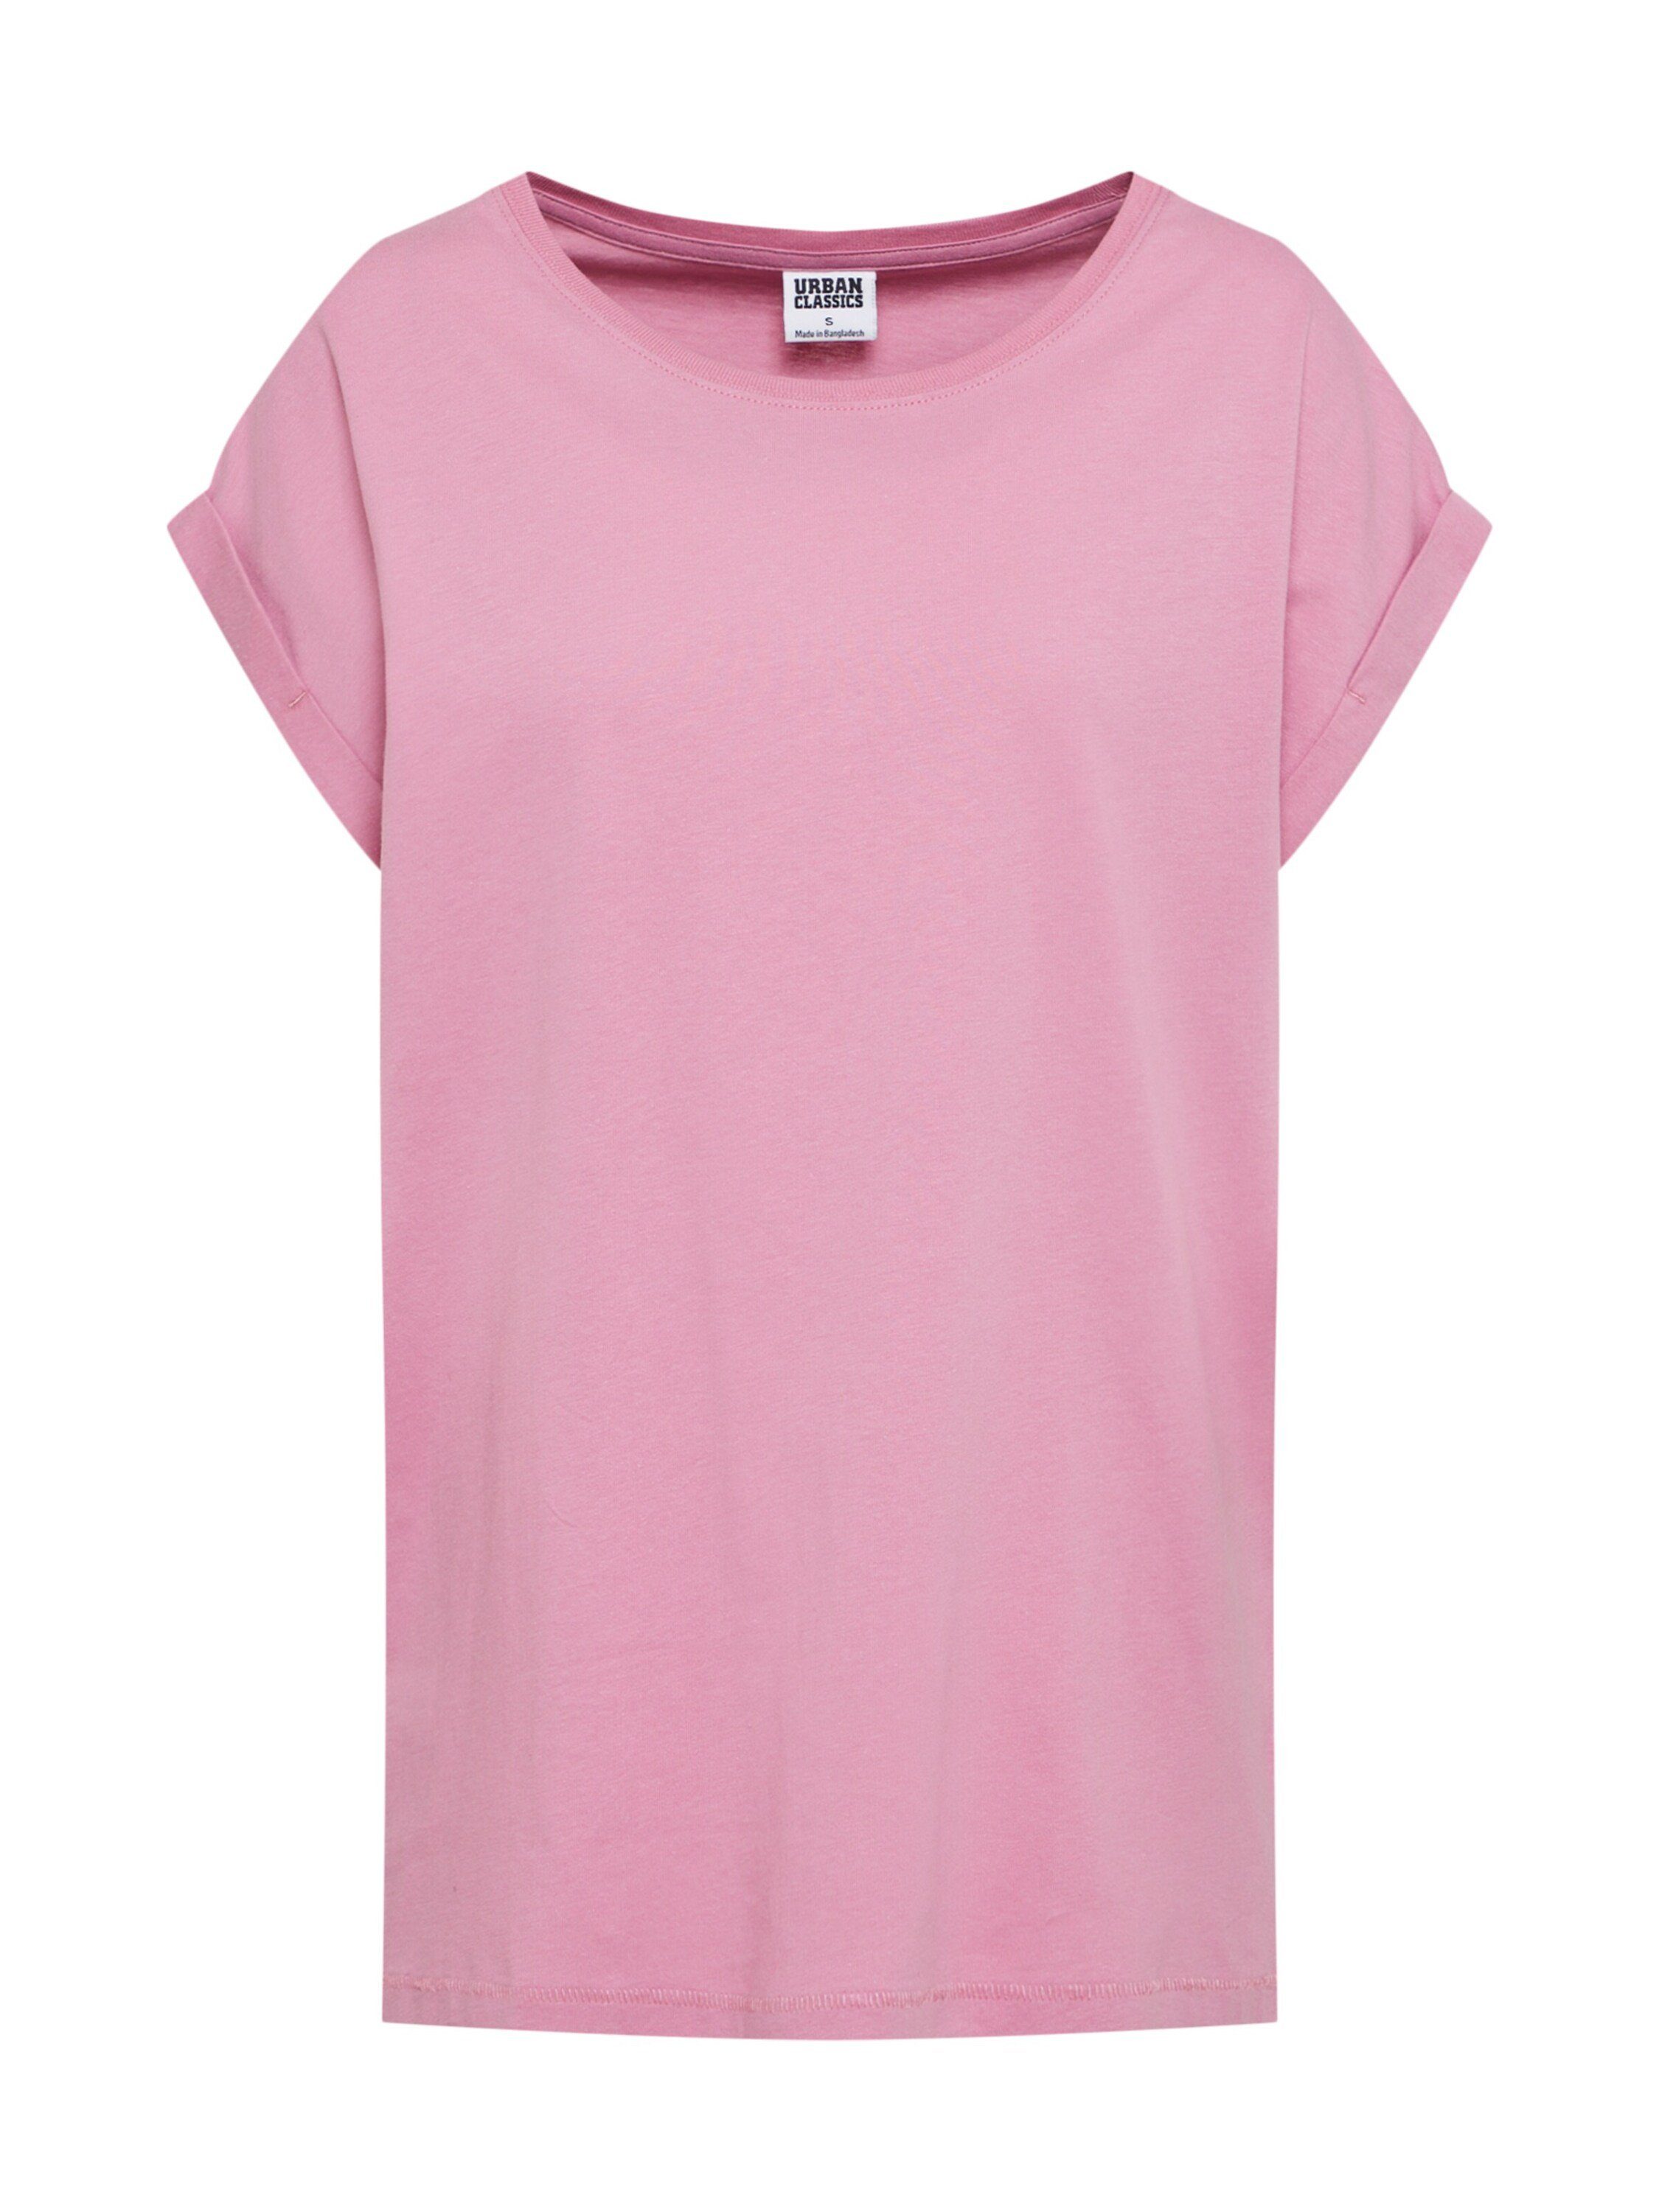 URBAN CLASSICS T-Shirt (1-tlg) Plain/ohne Details, Weiteres Detail TB771 coolpink Extended Shoulder | T-Shirts